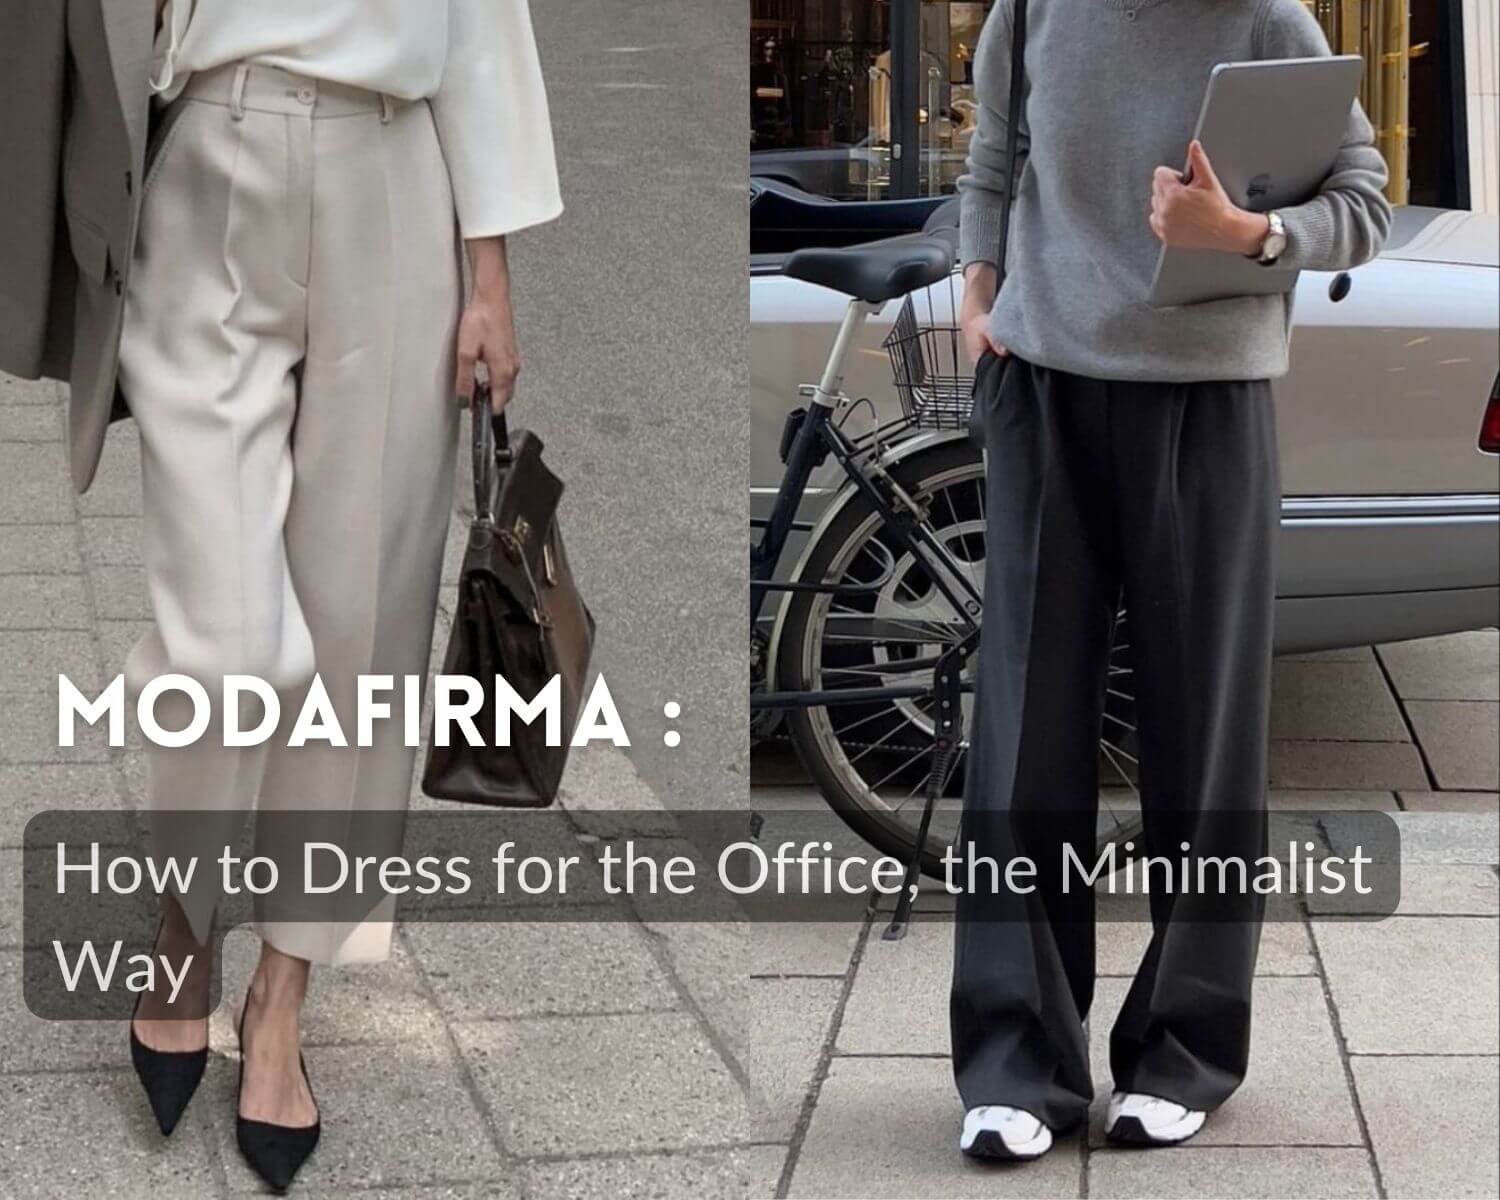 How to Dress for the Office, the Minimalist Way